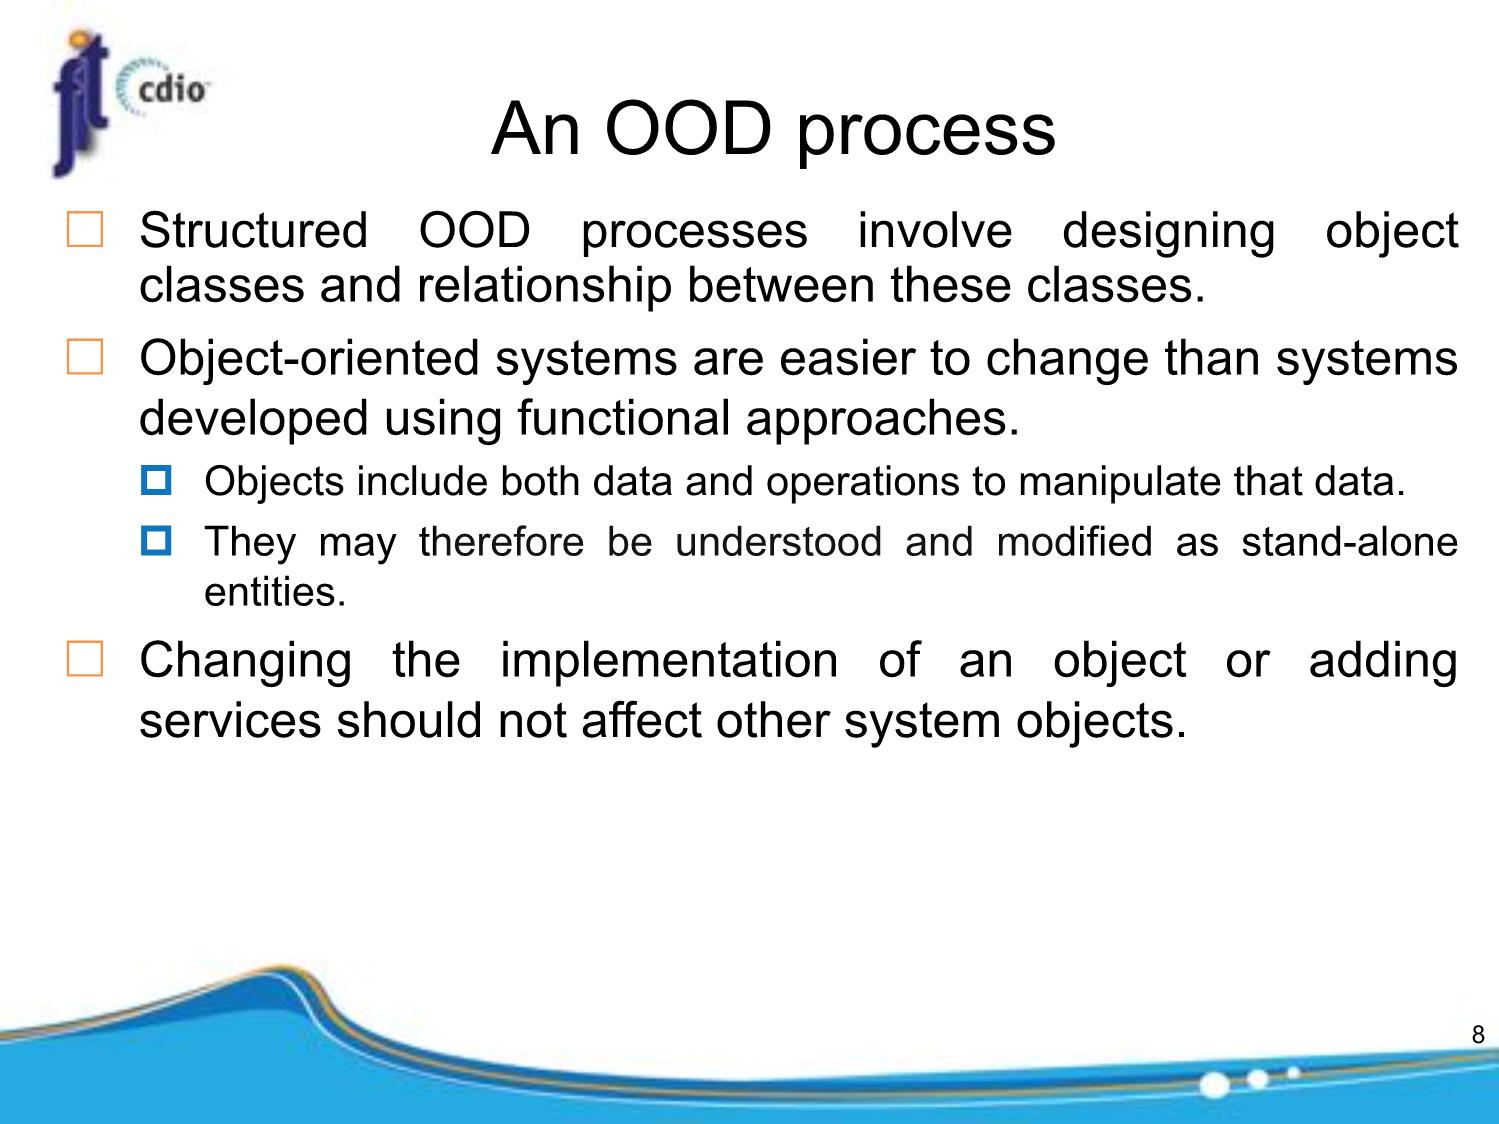 Bài giảng Introduction to Software Engineering - Week 7: Object-Oriented design - Nguyễn Thị Minh Tuyền trang 8